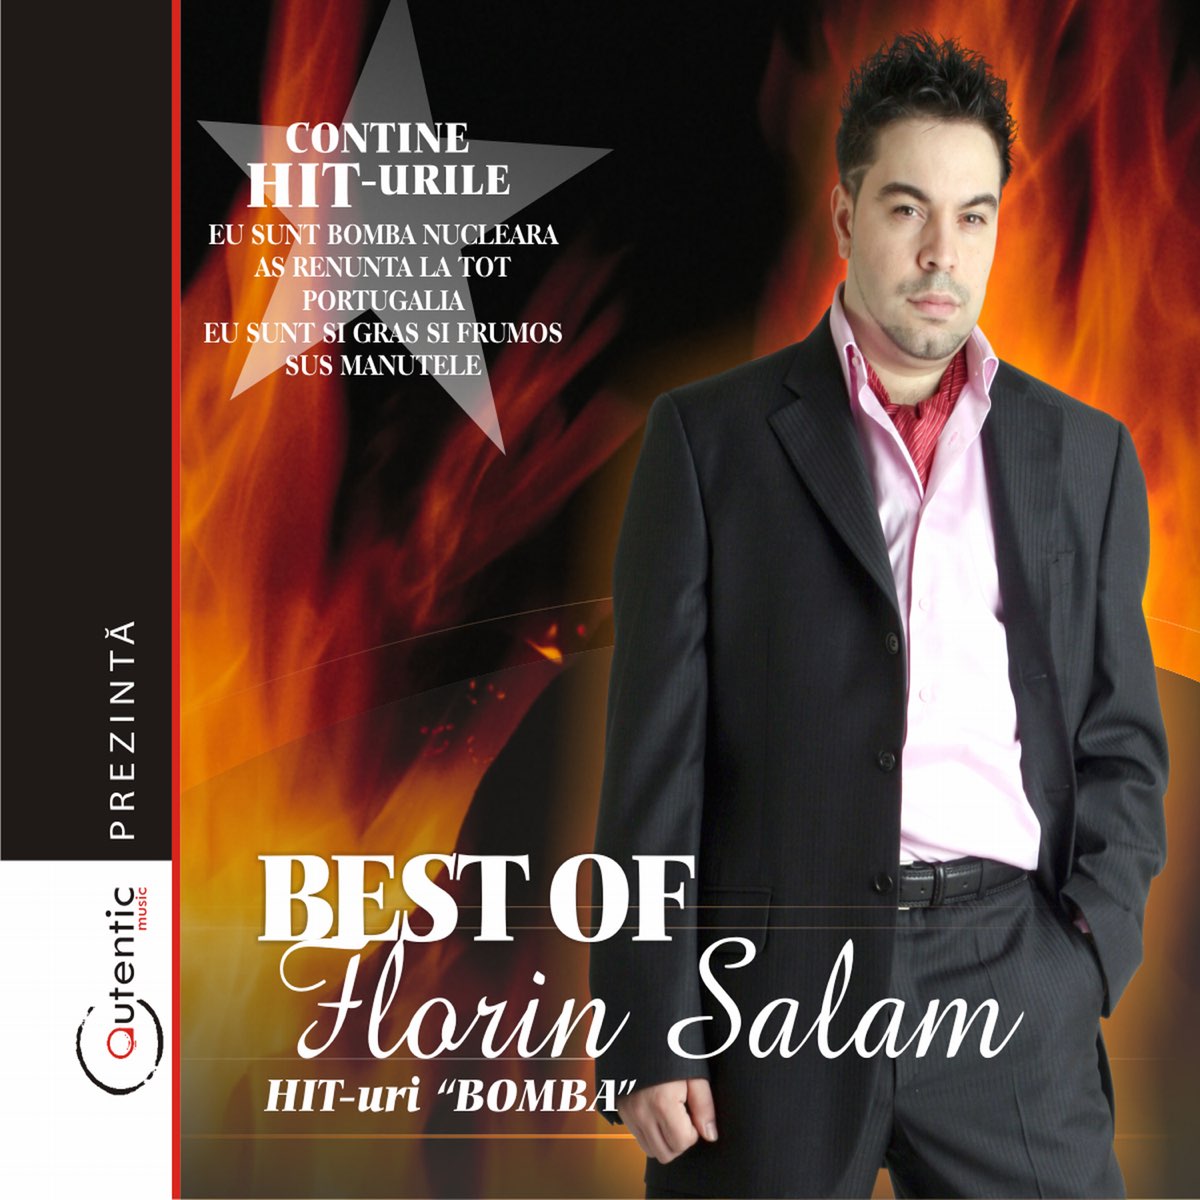 Best Of by Florin Salam on Apple Music